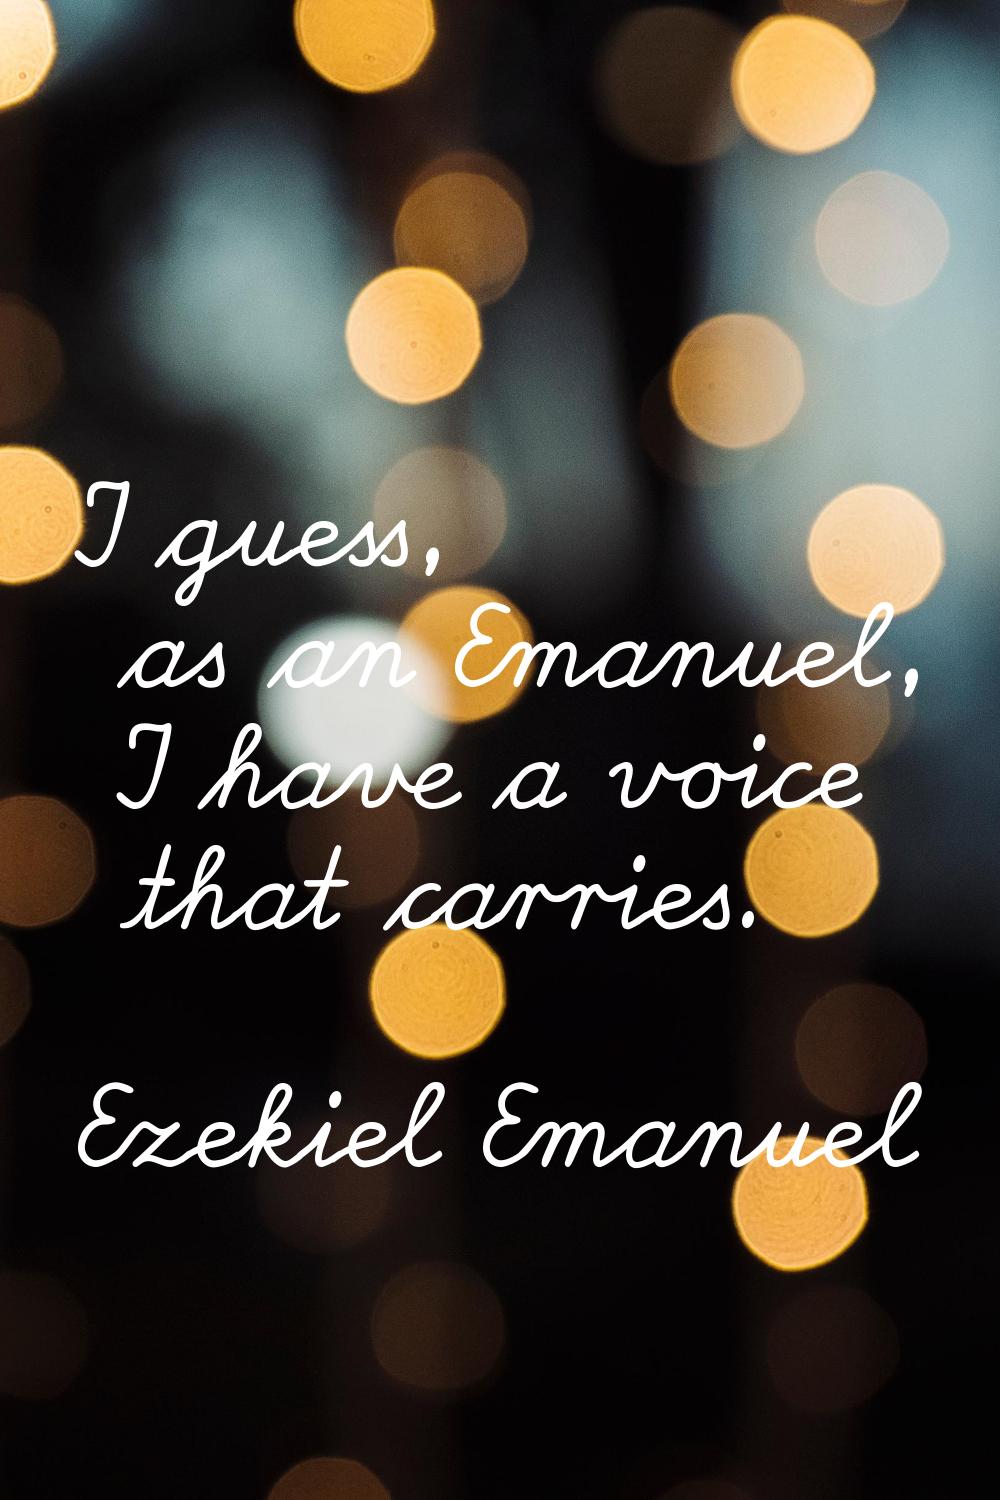 I guess, as an Emanuel, I have a voice that carries.